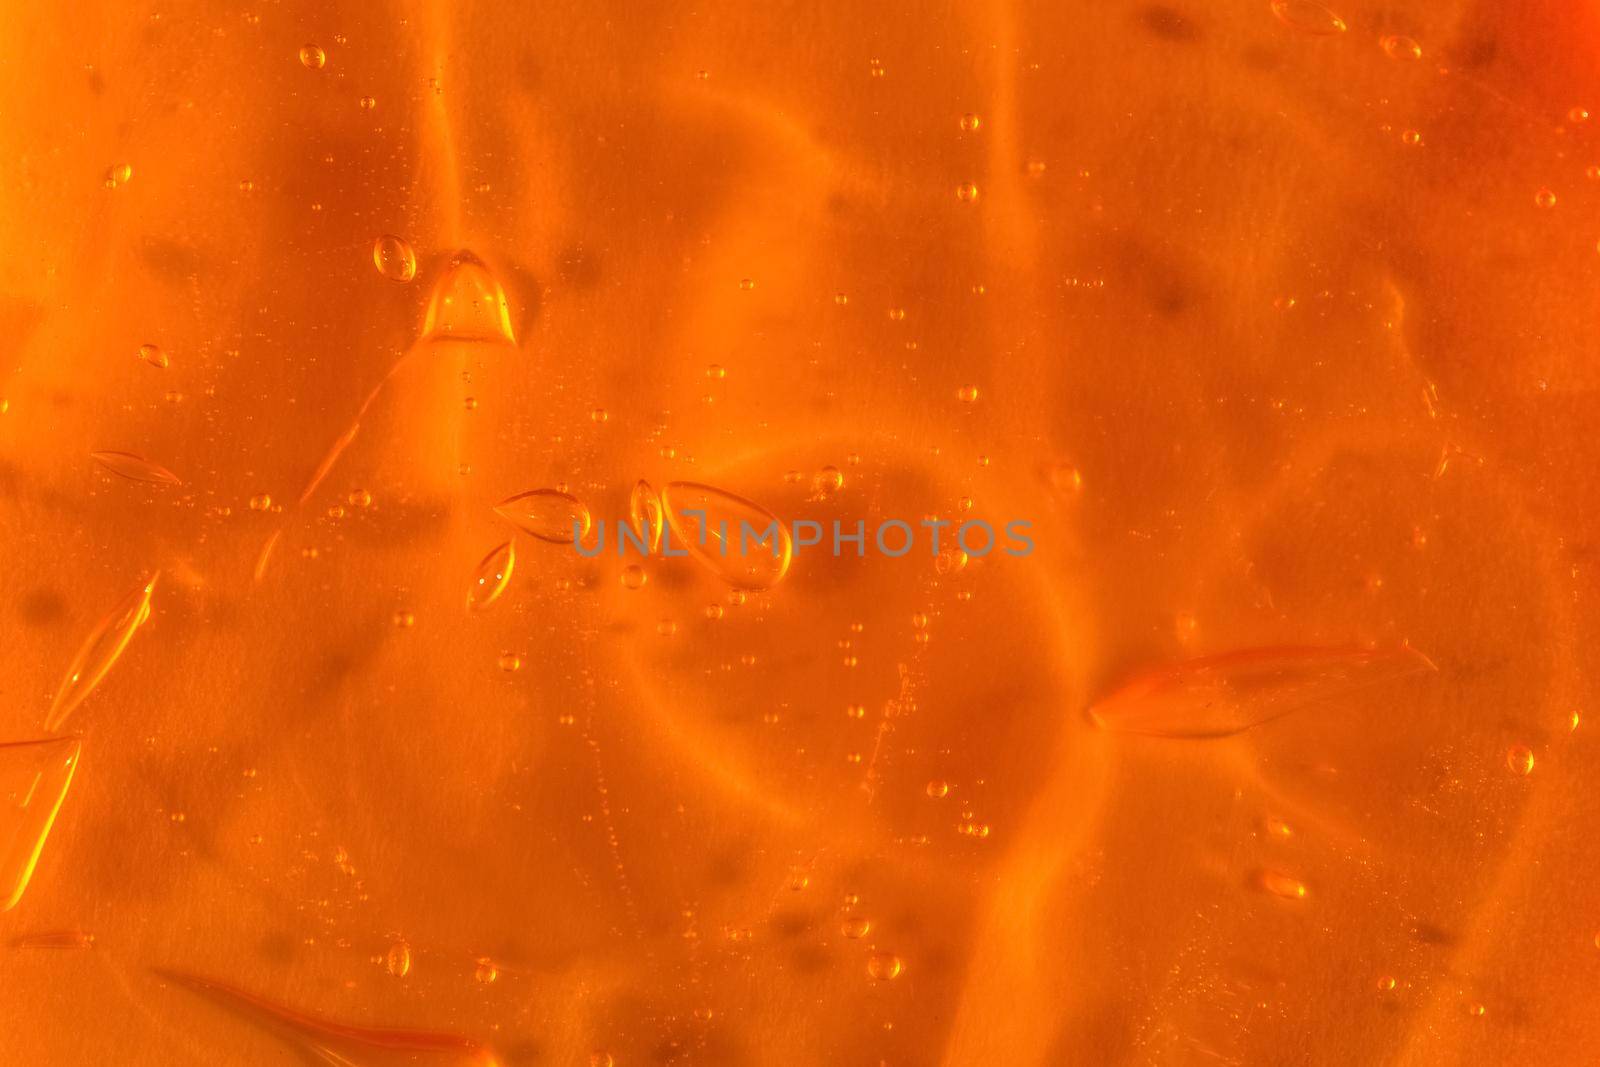 Texture of transparent yellow gel with air bubbles and waves on orange background. Concept of skin moisturizing, body care and prevention of covid19. Liquid beauty product closeup. Backdrop, flat lay